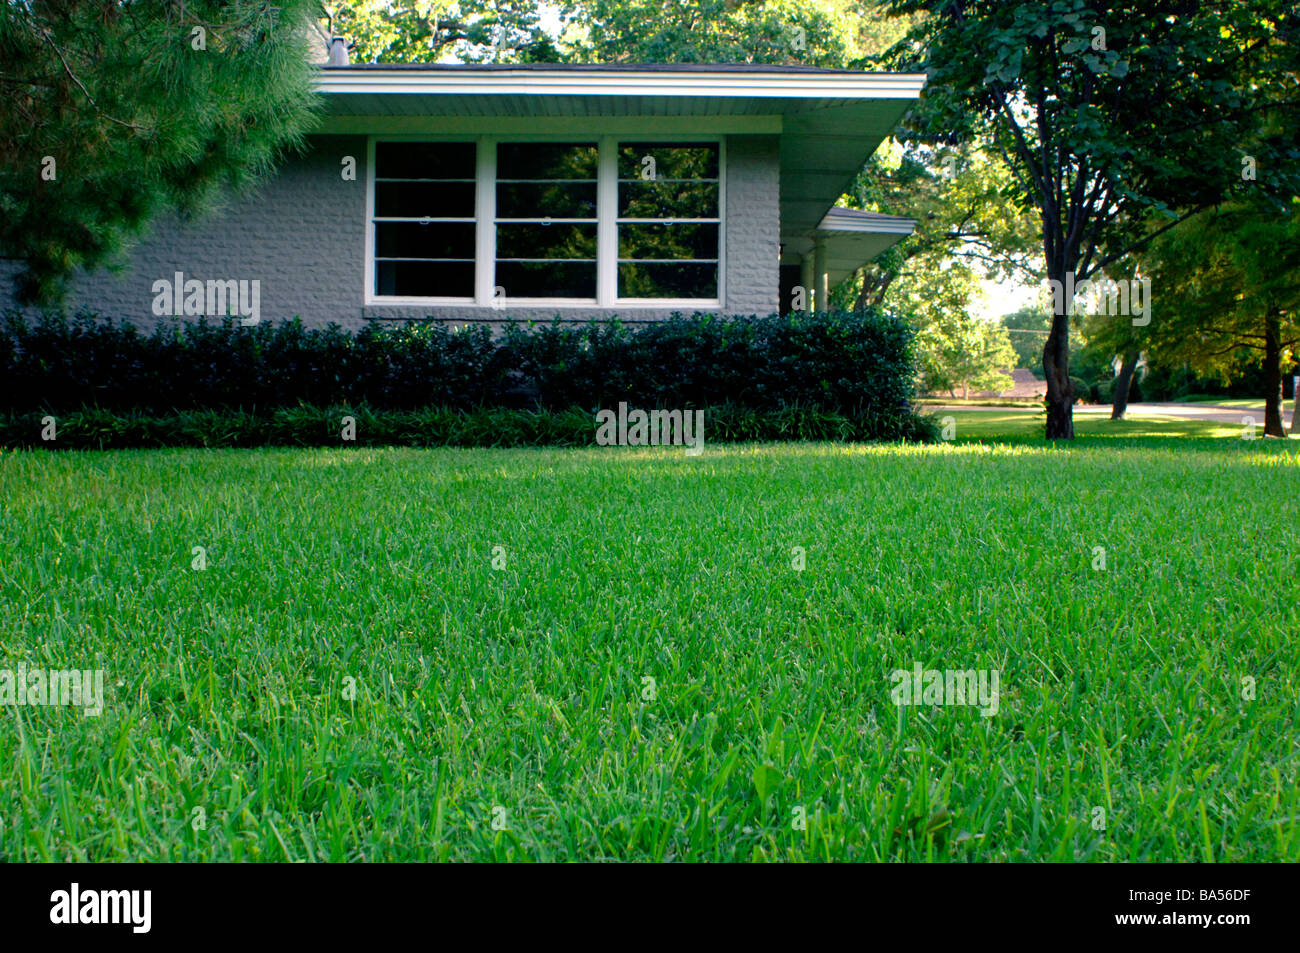 Green well watered lawn depicting water usage which accounts for 30% of total water usage in many US cities Stock Photo